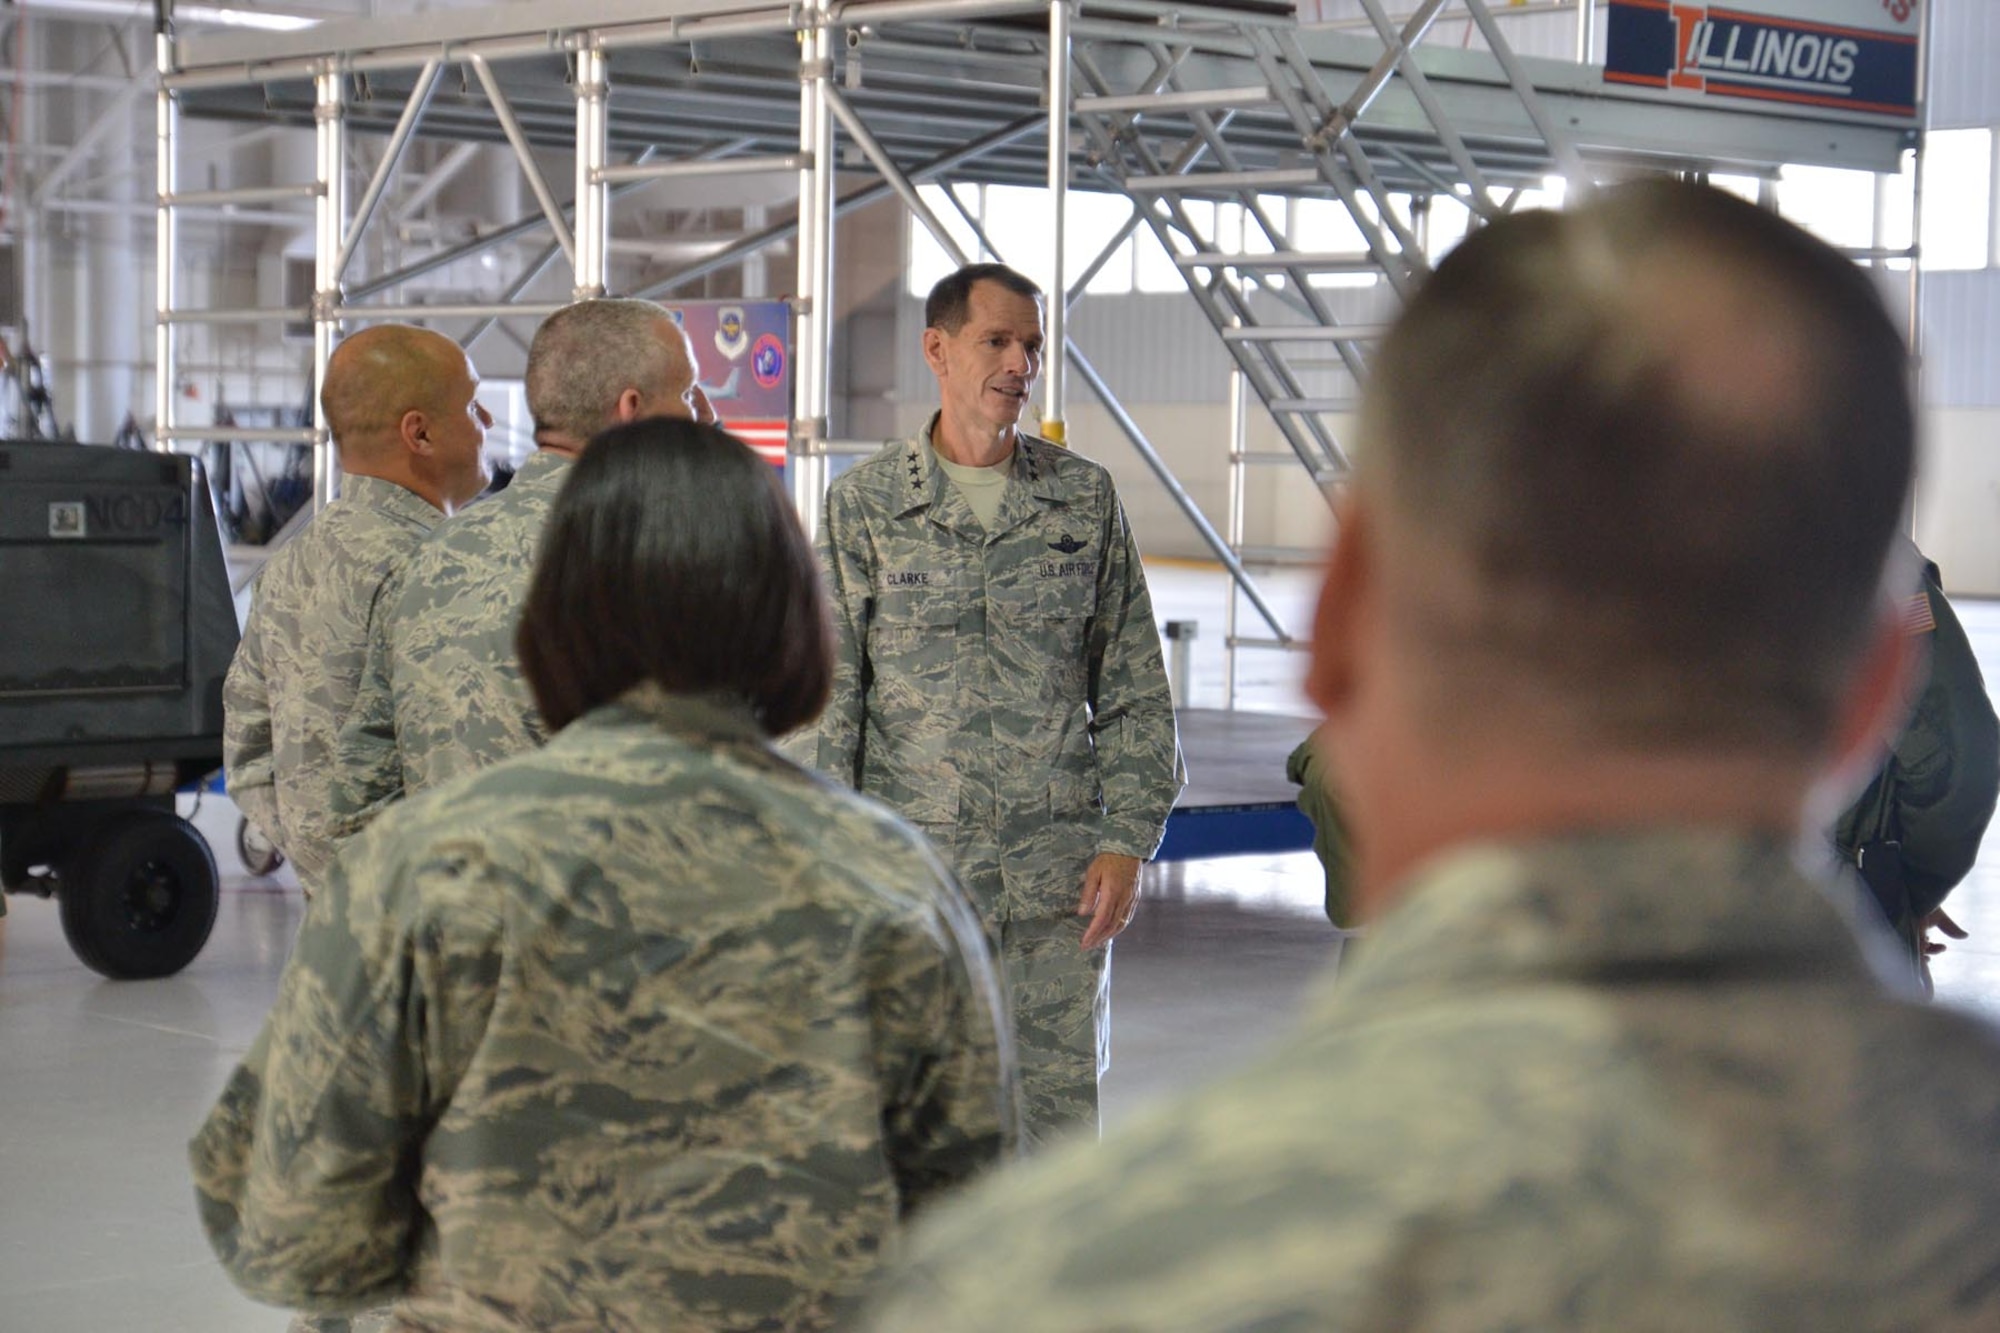 Lt. Gen. Stanley Clarke, Director of the Air National Guard discusses the hangar facility with senior staff of the 126th Air Refueling Wing during his visit to the Wing located at Scott AFB, Ill., Sept. 5, 2013. (Air National Guard photo by Master Sgt. Ken Stephens)